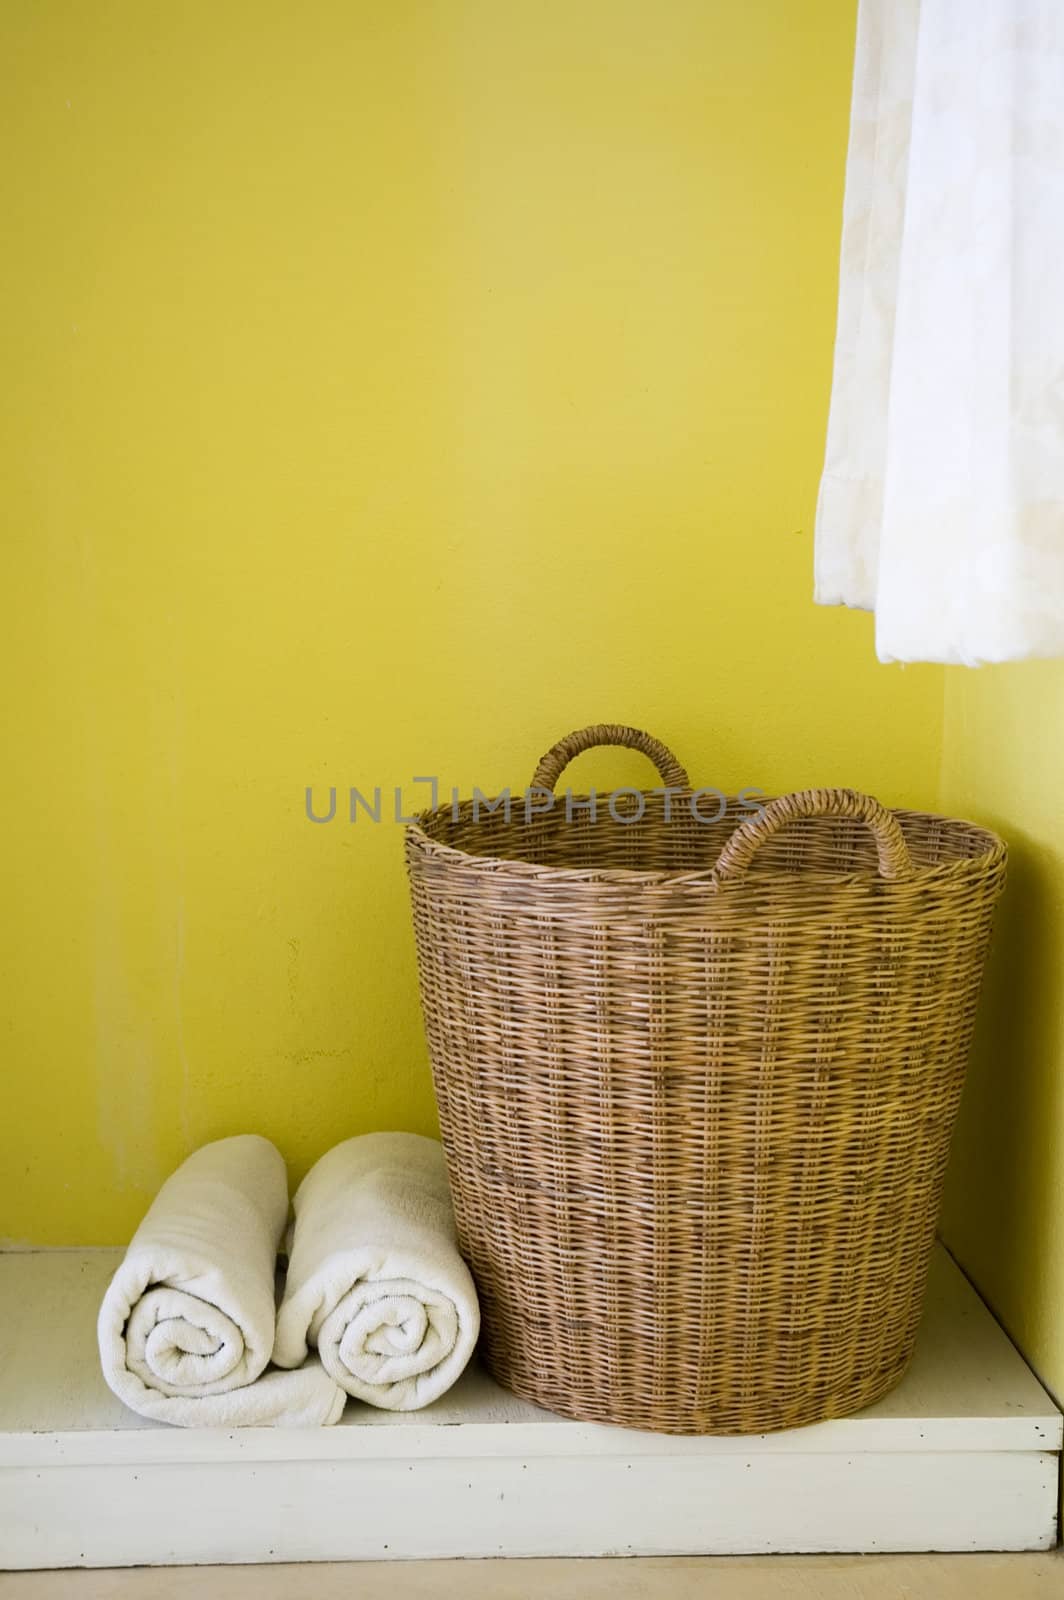 big basket and towels in yellow background.